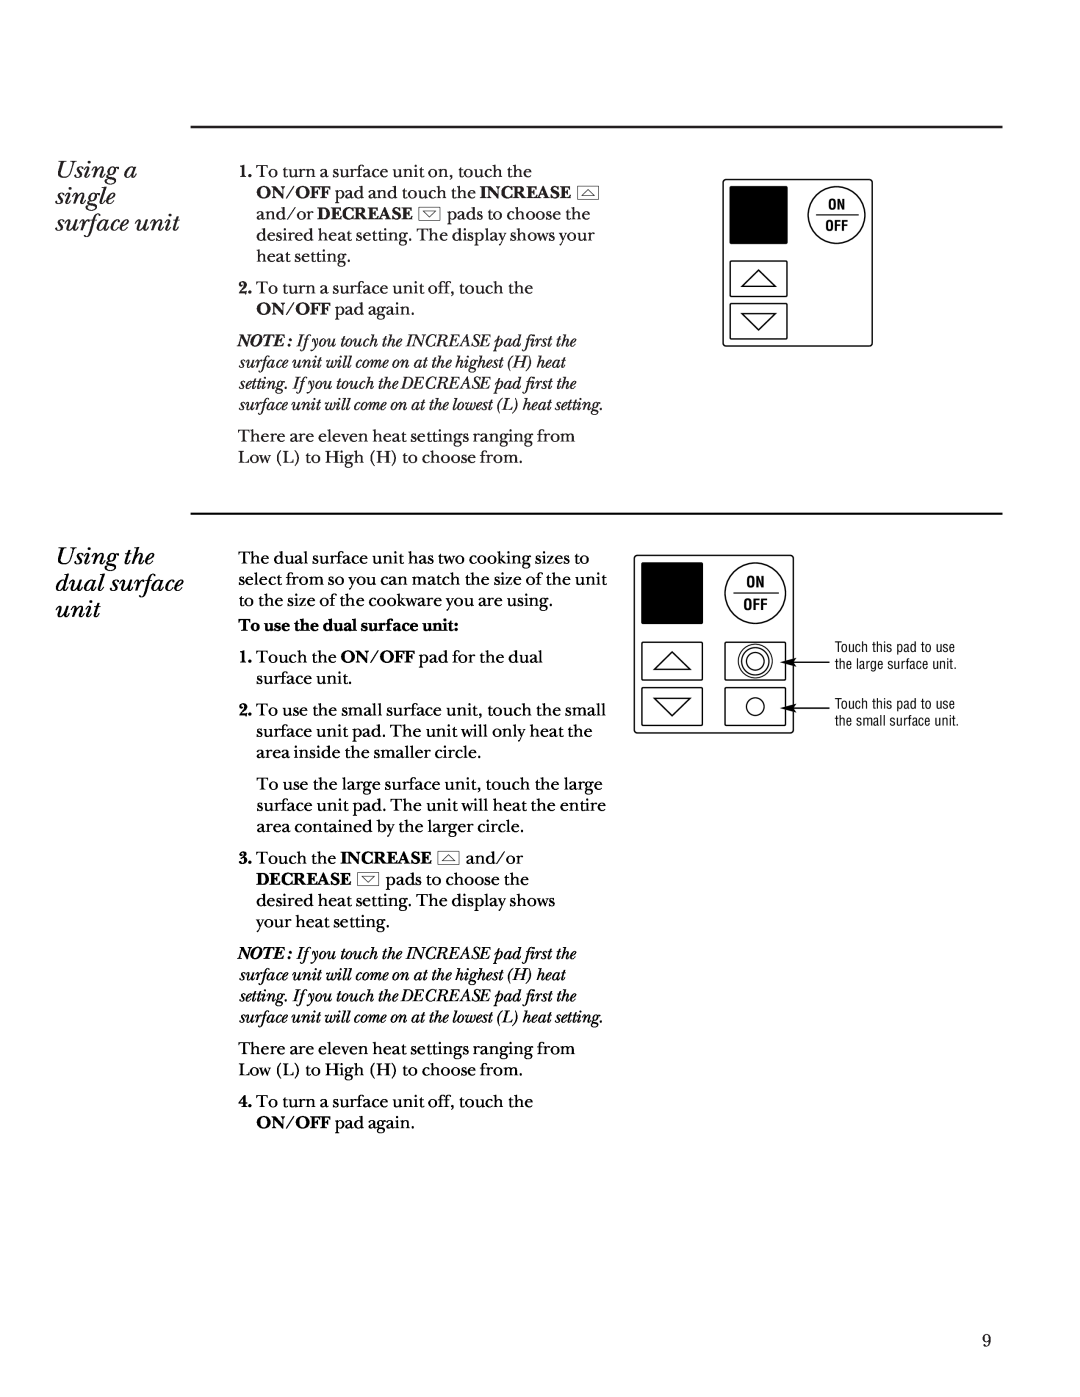 GE Monogram Digital Radiant Cooktop owner manual Using a single surface unit, Using the dual surface unit 